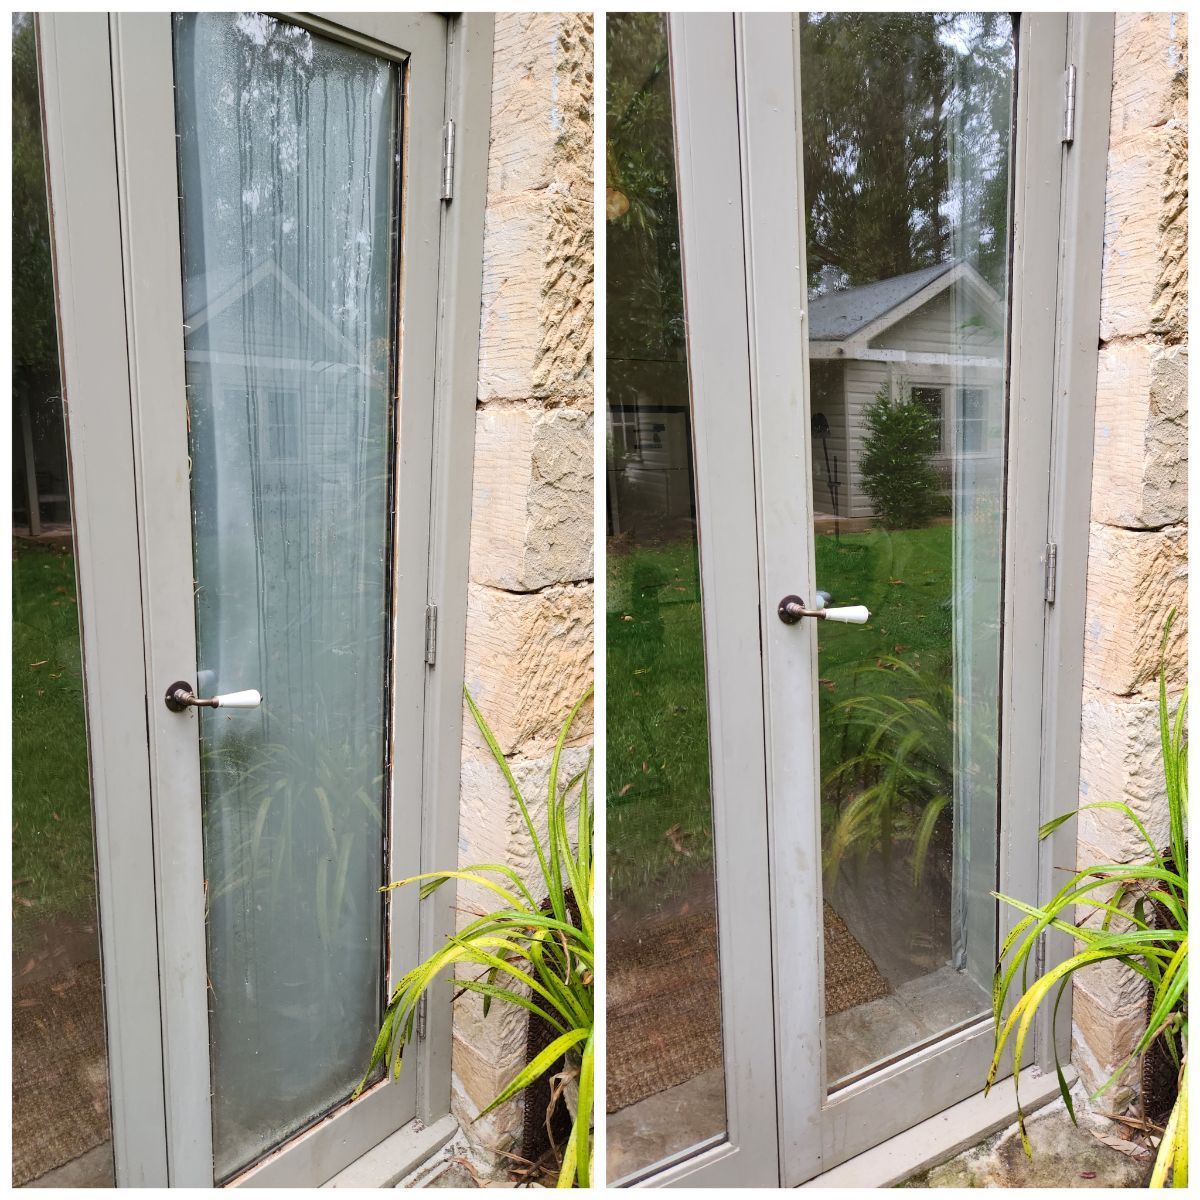 Door Glass Repair - Glazier in the Southern Highlands